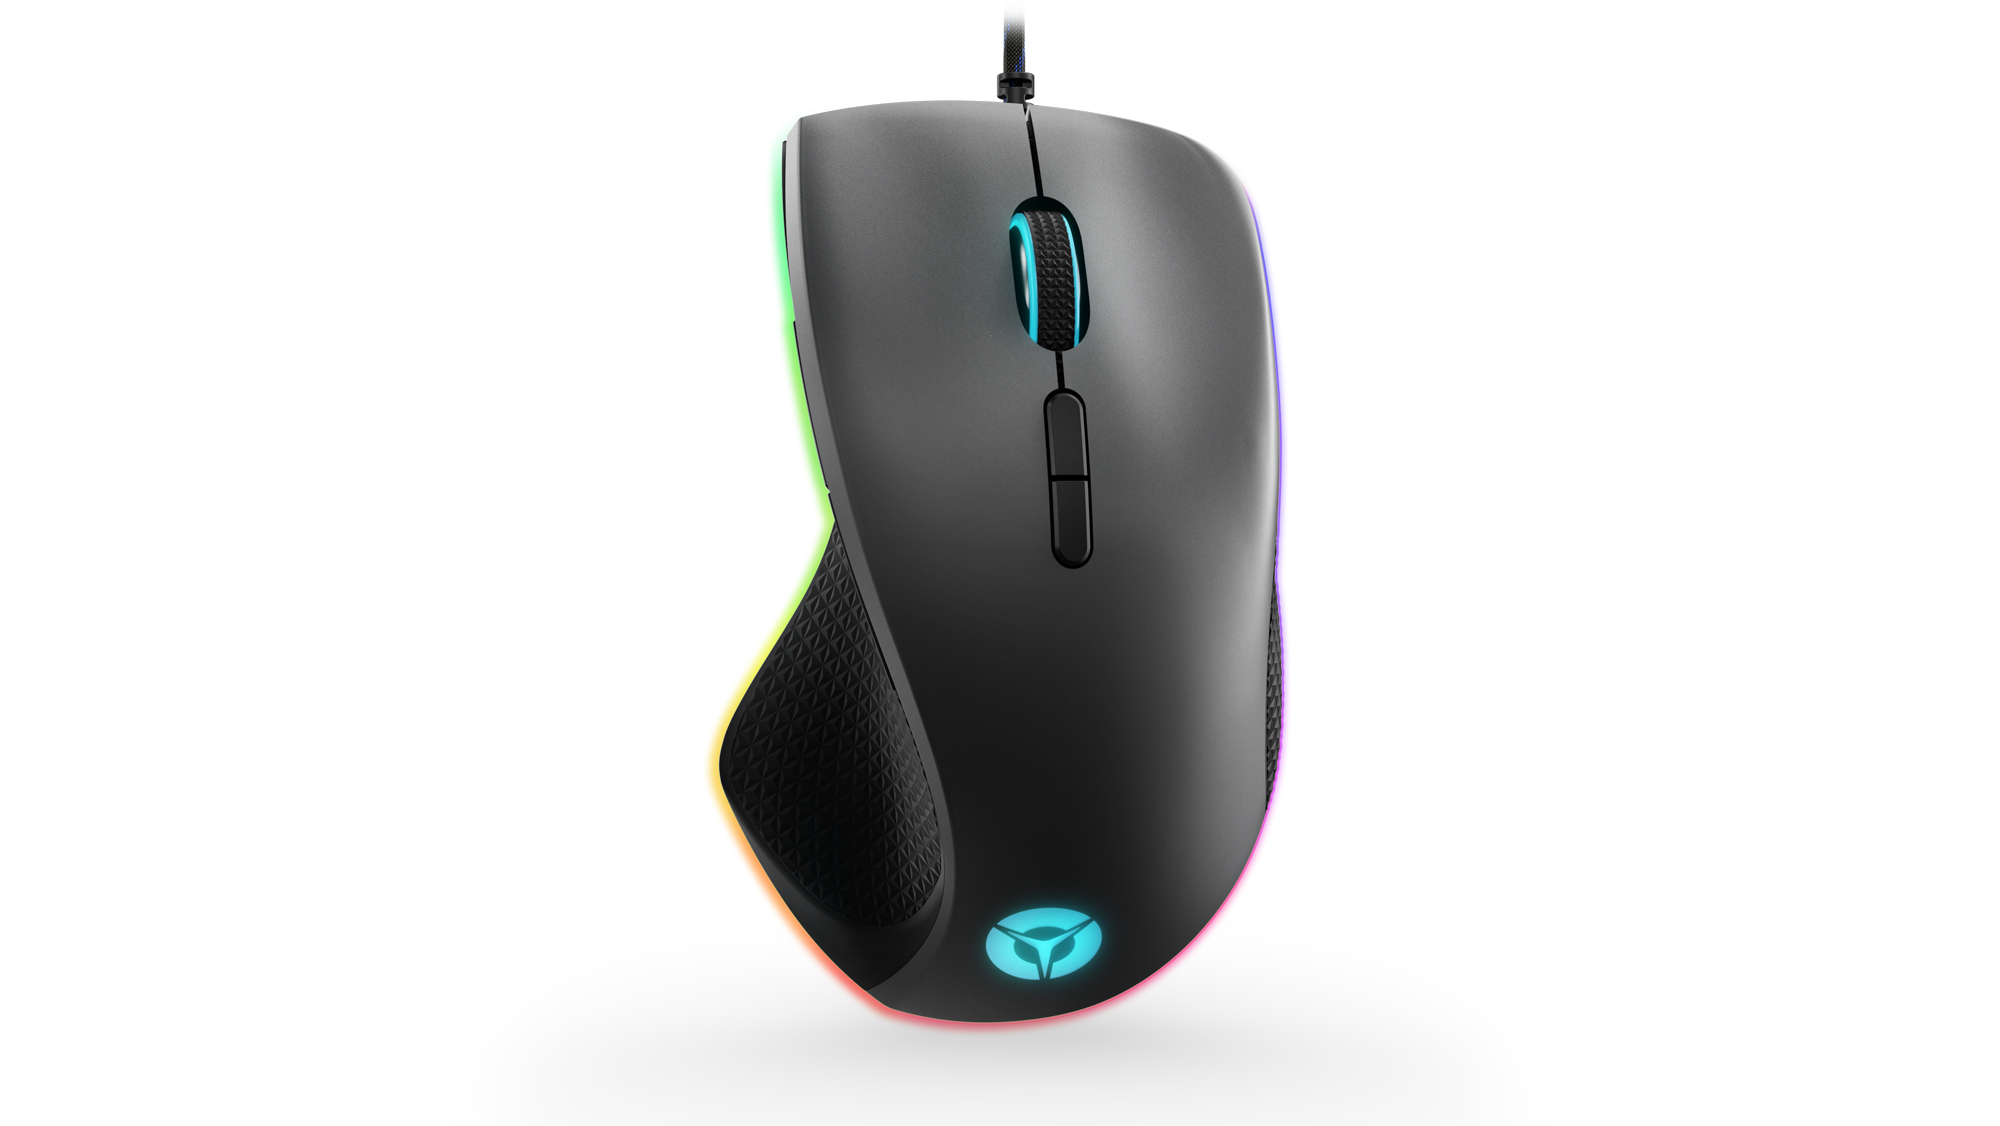 lenovo announce new legion gaming peripherals ces 2019 03 m500 omron micro switches with 50 million clicks